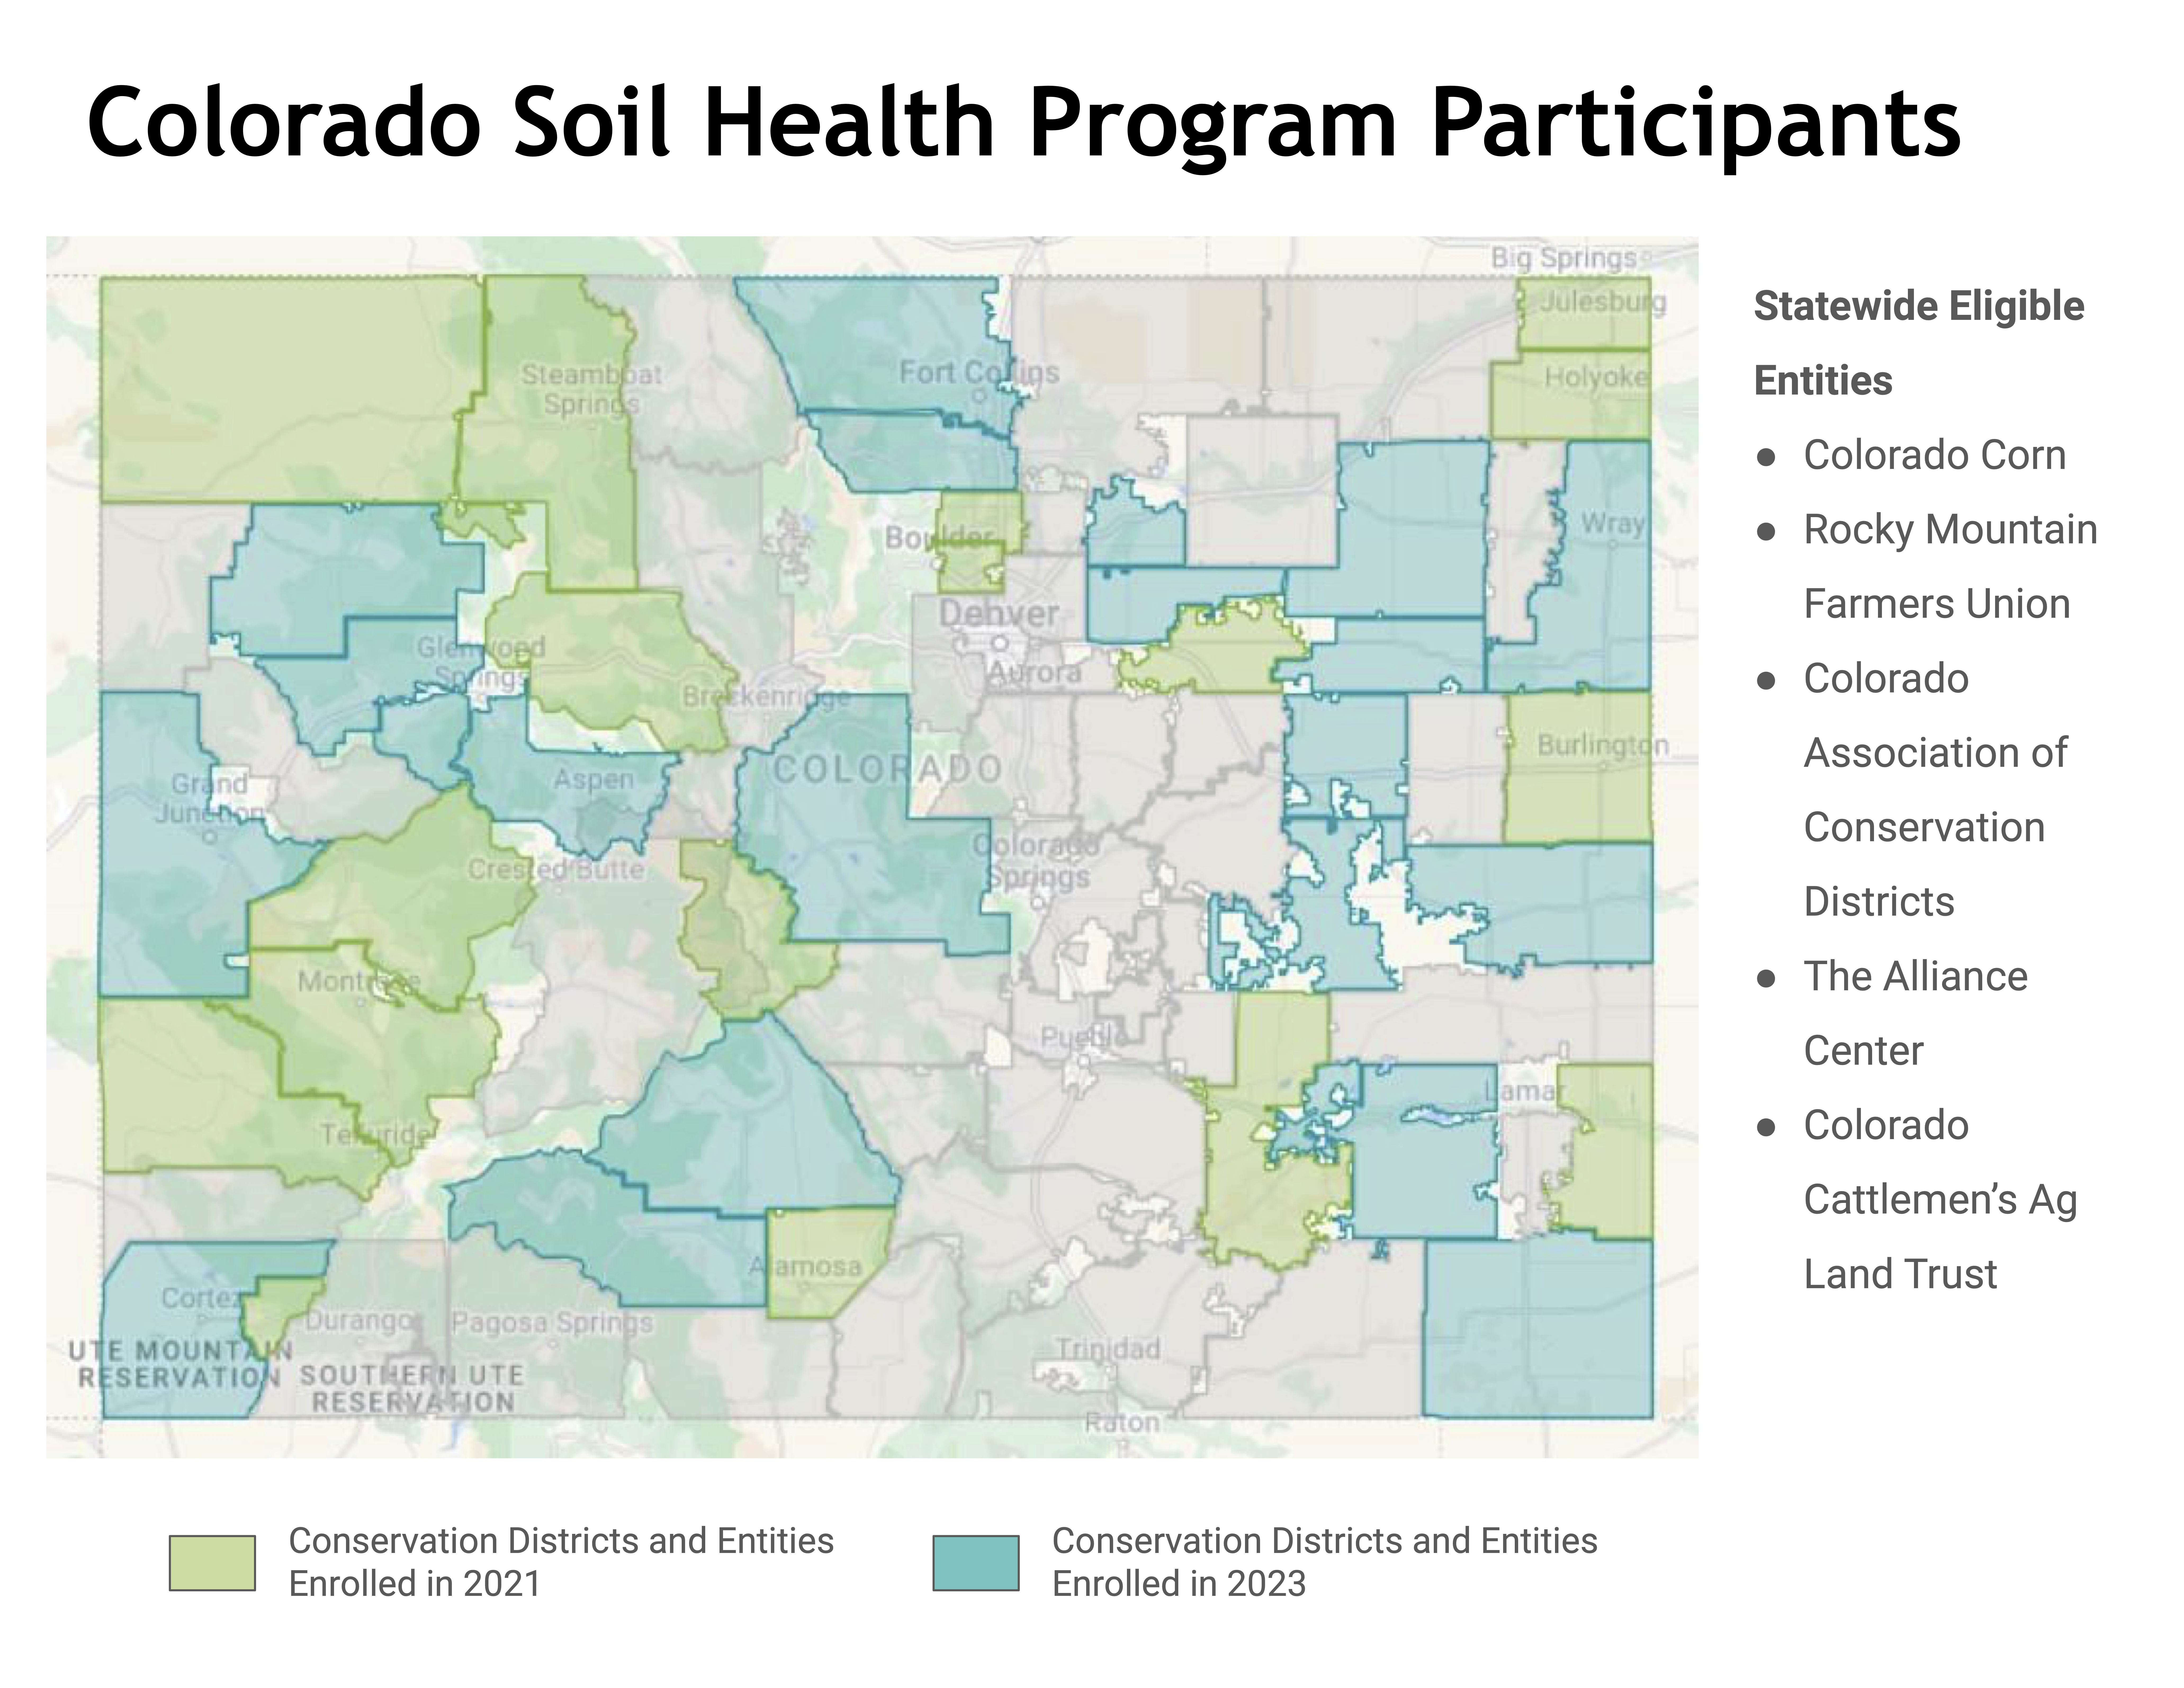 Color coded map of program participants in the State of Colorado.